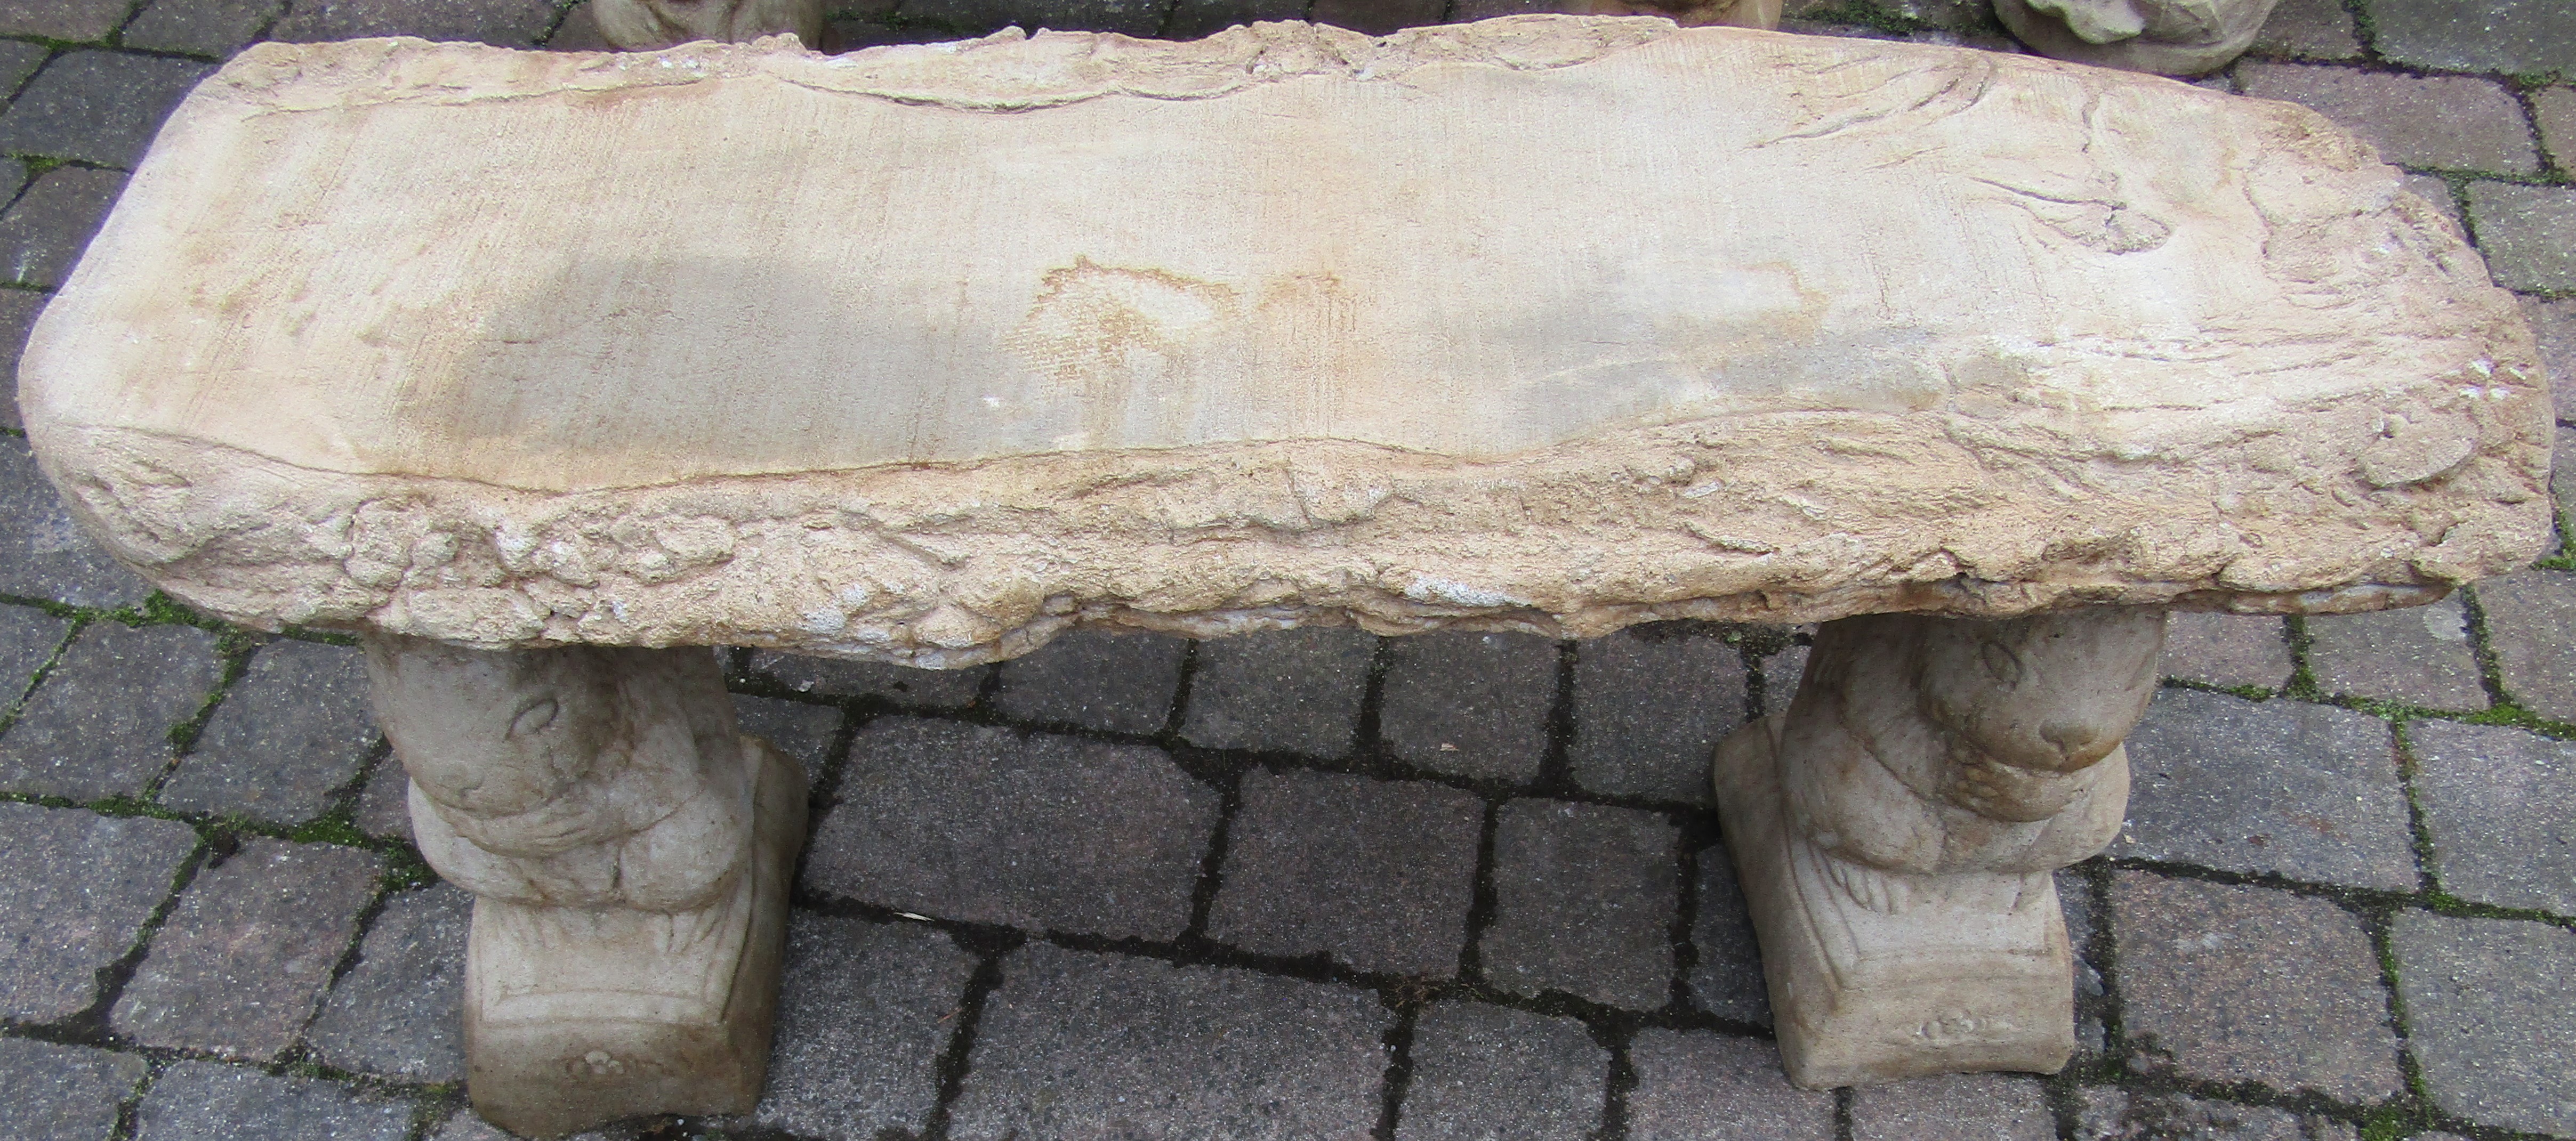 Concrete timber effect garden seat with squirrel plinths